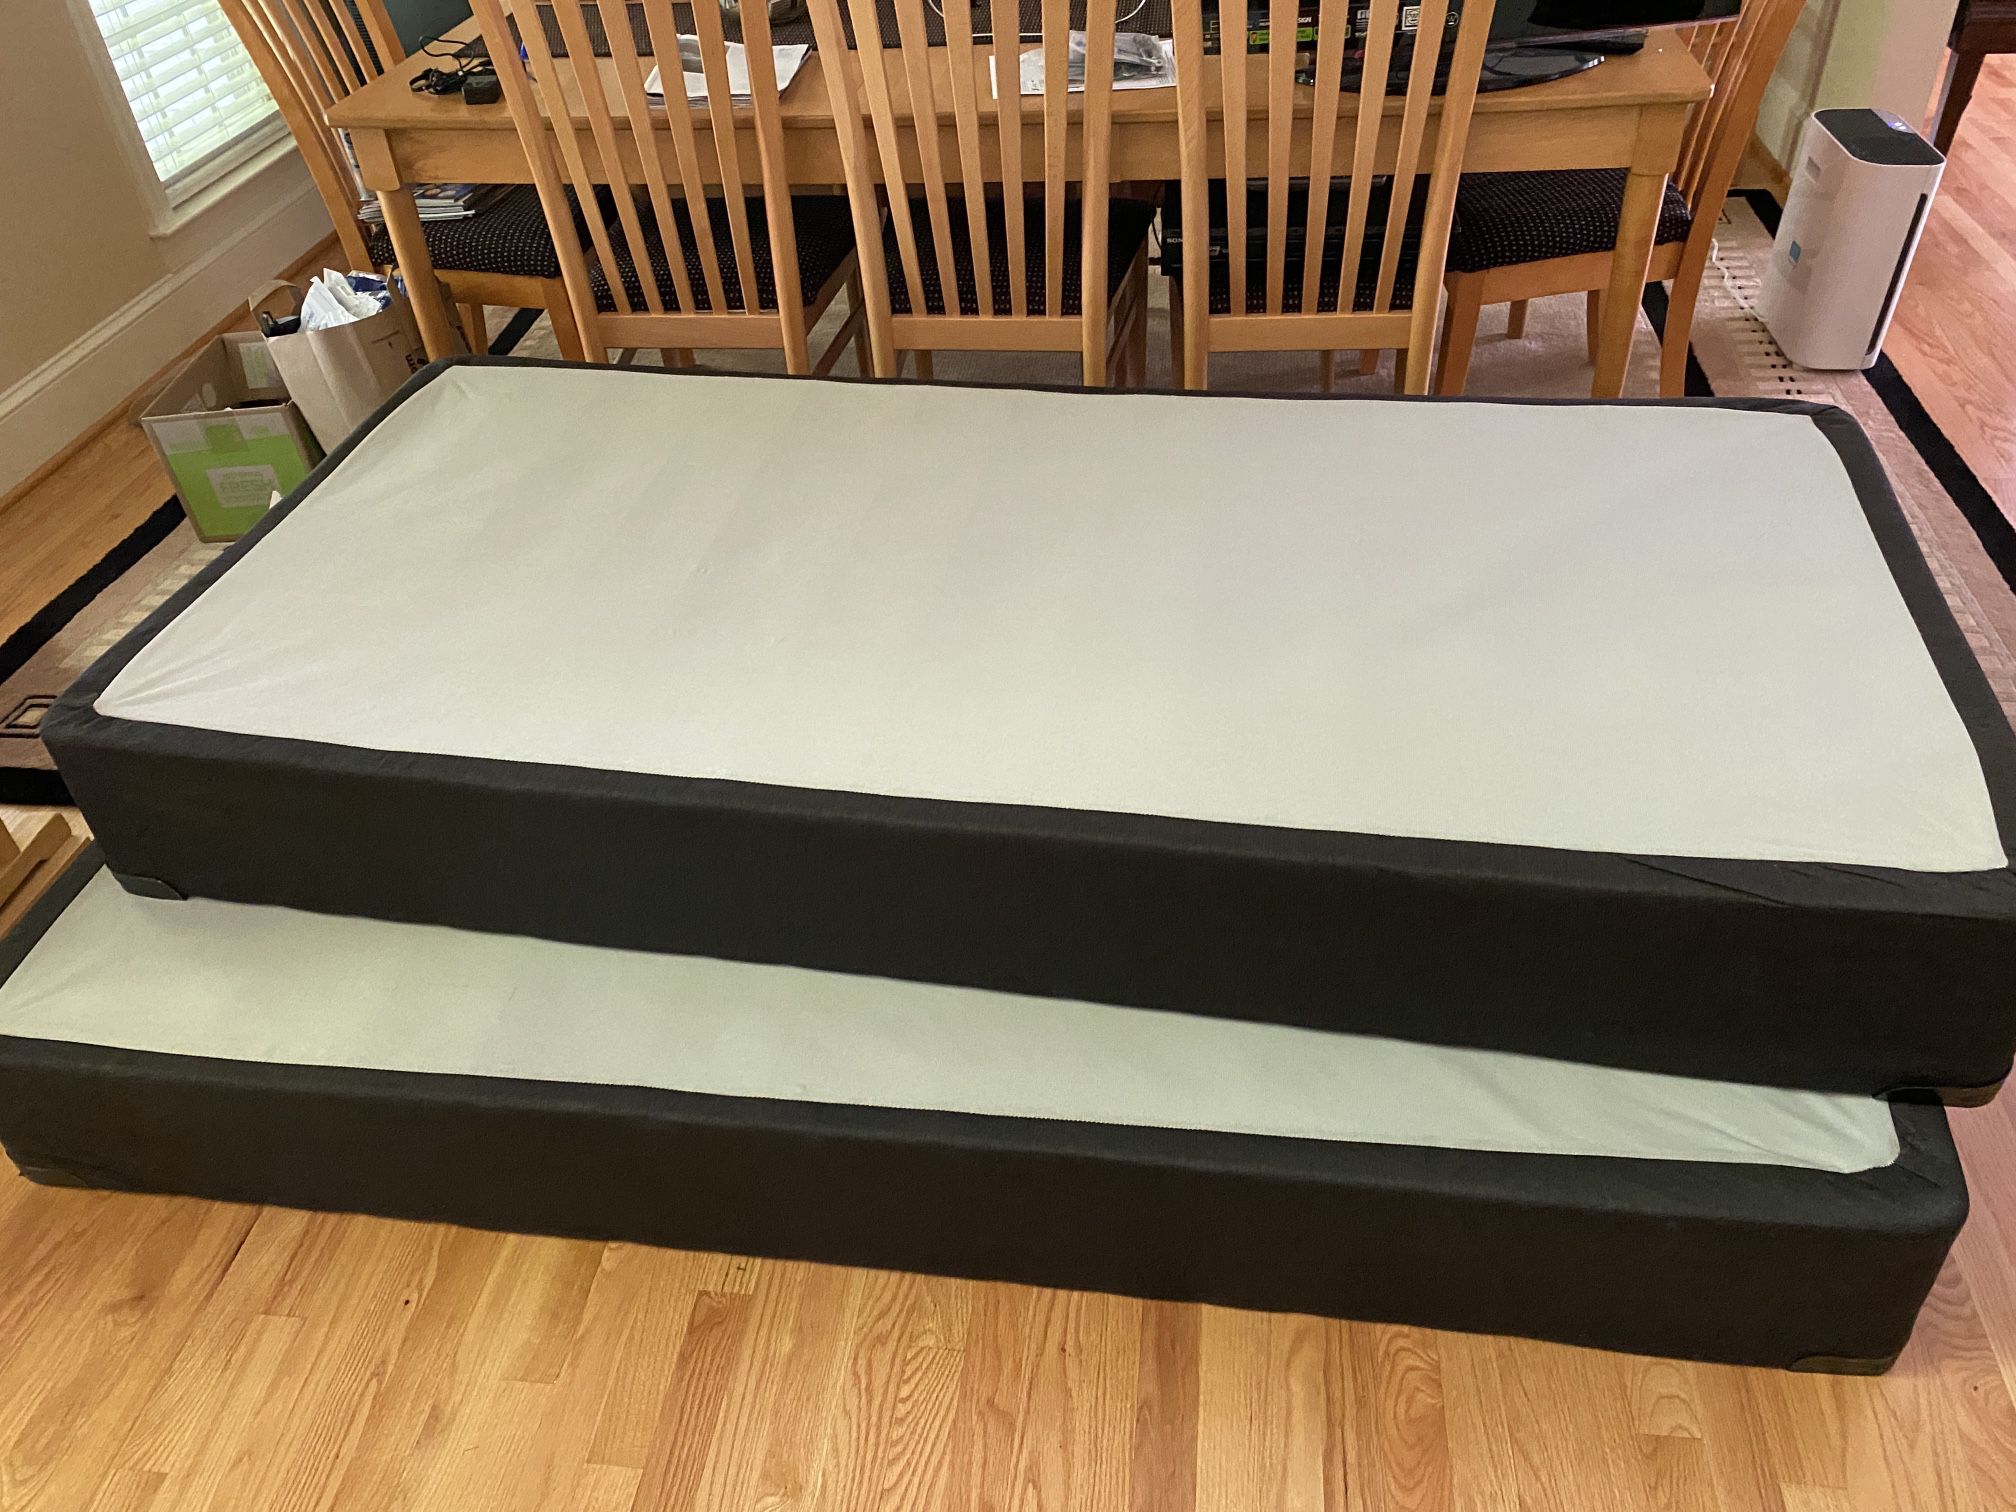 King Bed Size (2x Long Twin) Mattress Support Boxes